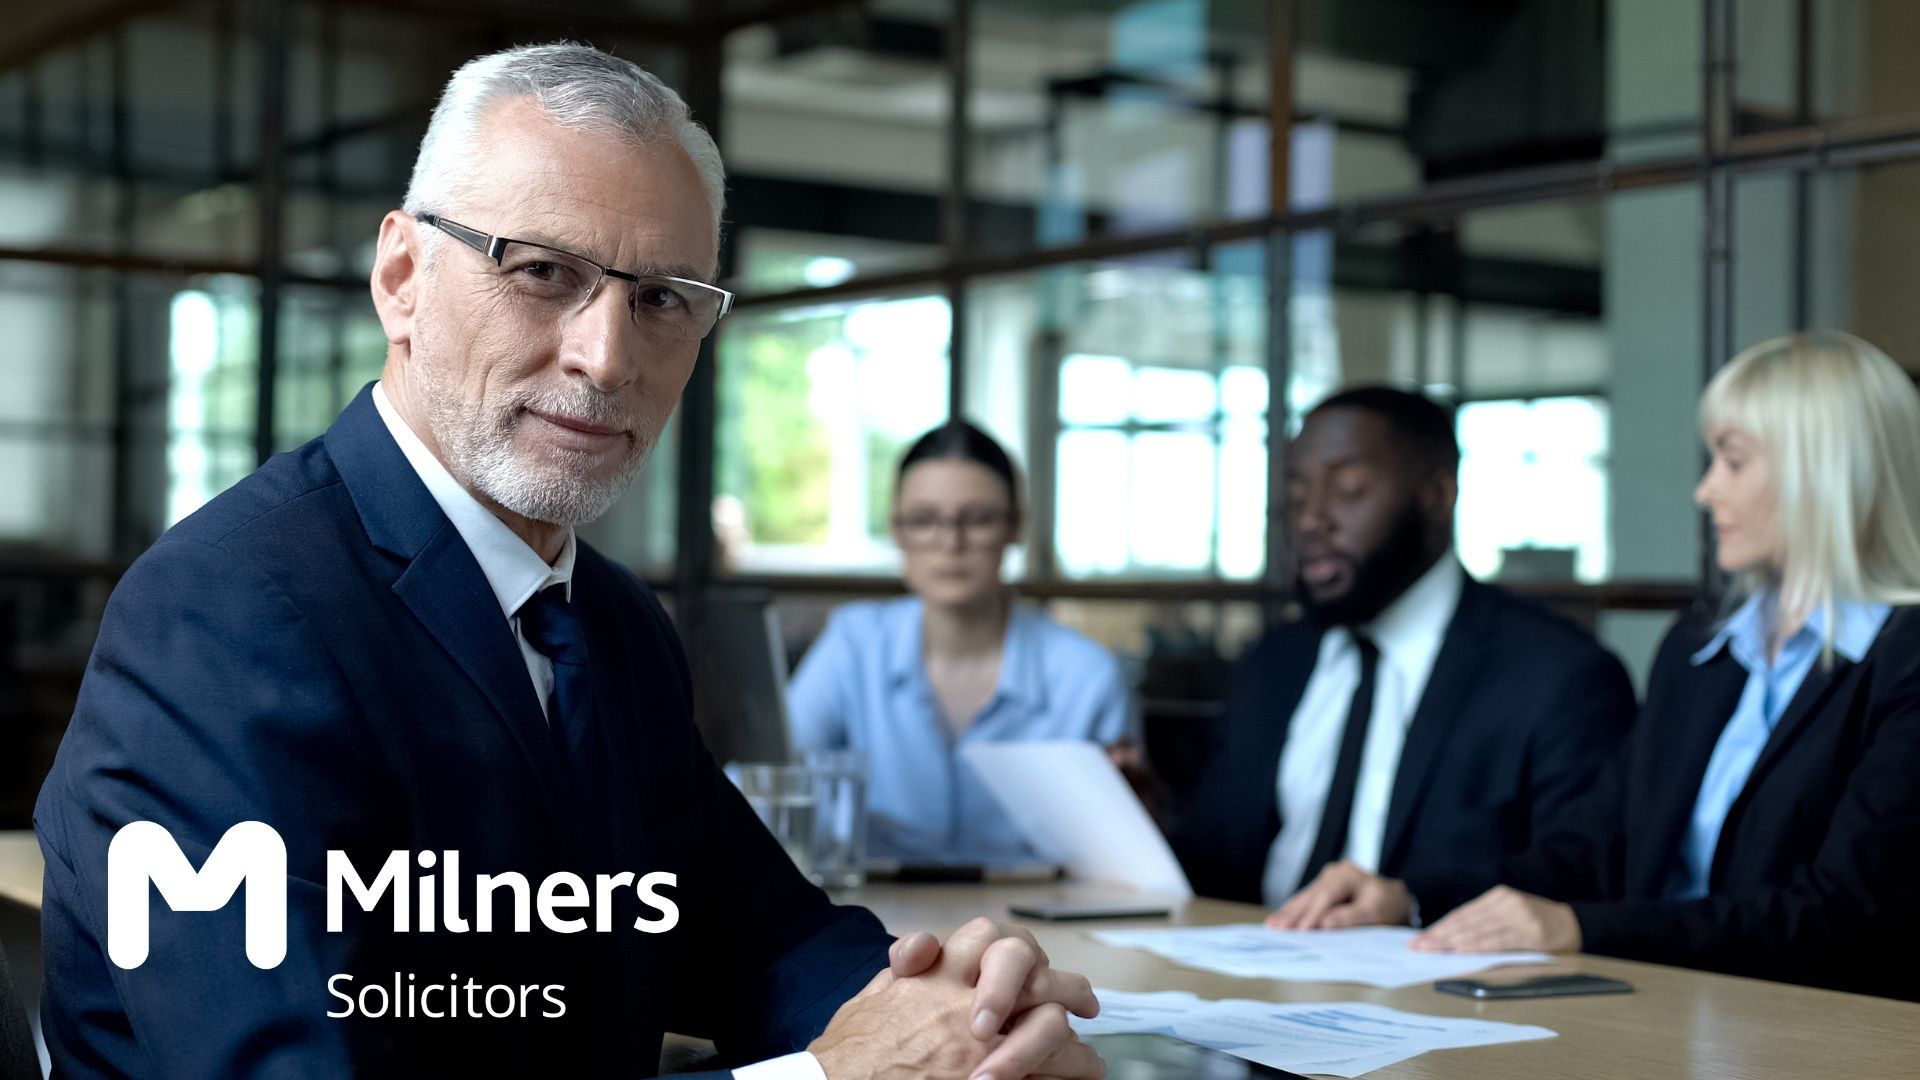 Limited companies are run by directors – and these directors have specific legal duties outlined in the Companies Act 2006. Learn more in our guide.